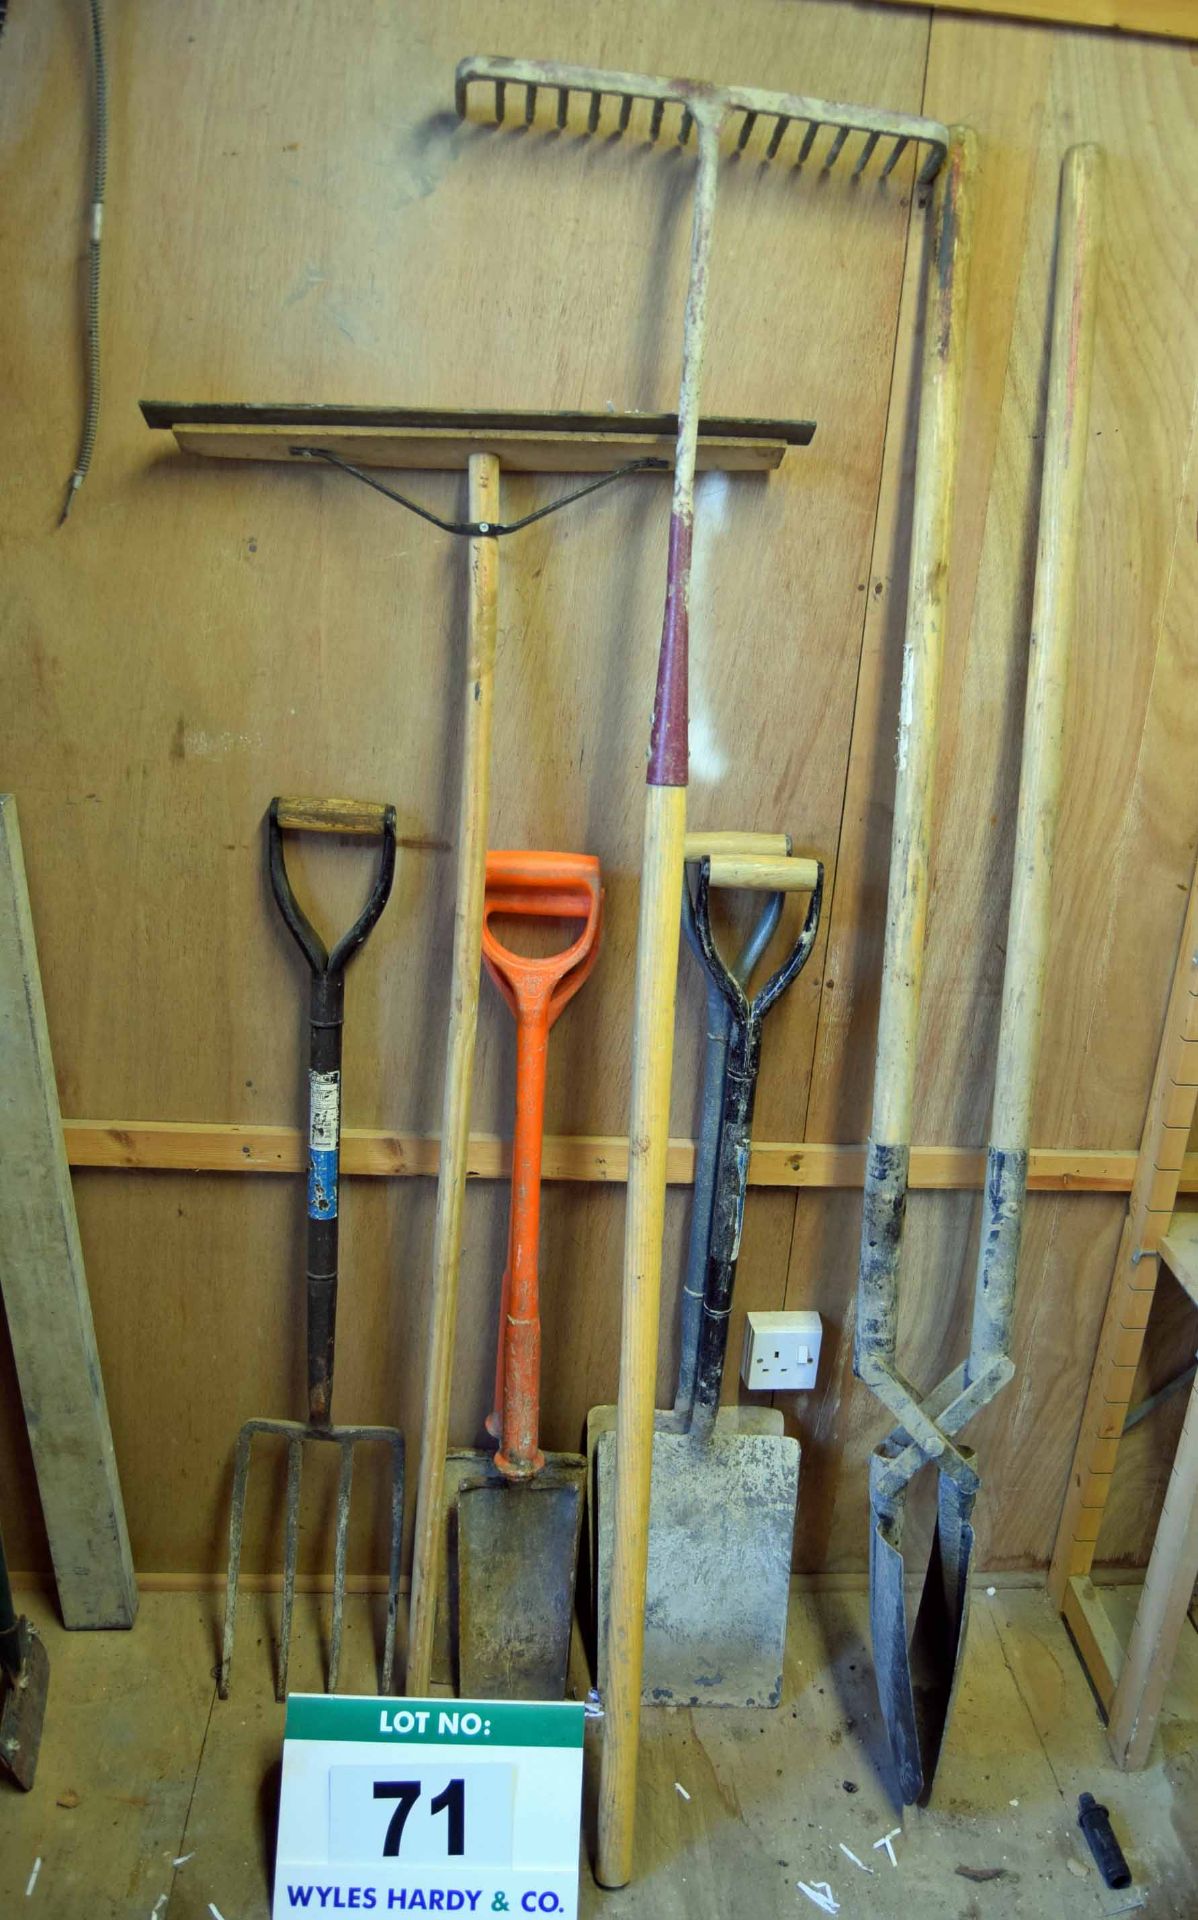 A Set of Groundworks Hand Tools including One 4-Tine Fork, Two Insulated Spades, Two Shovels, One